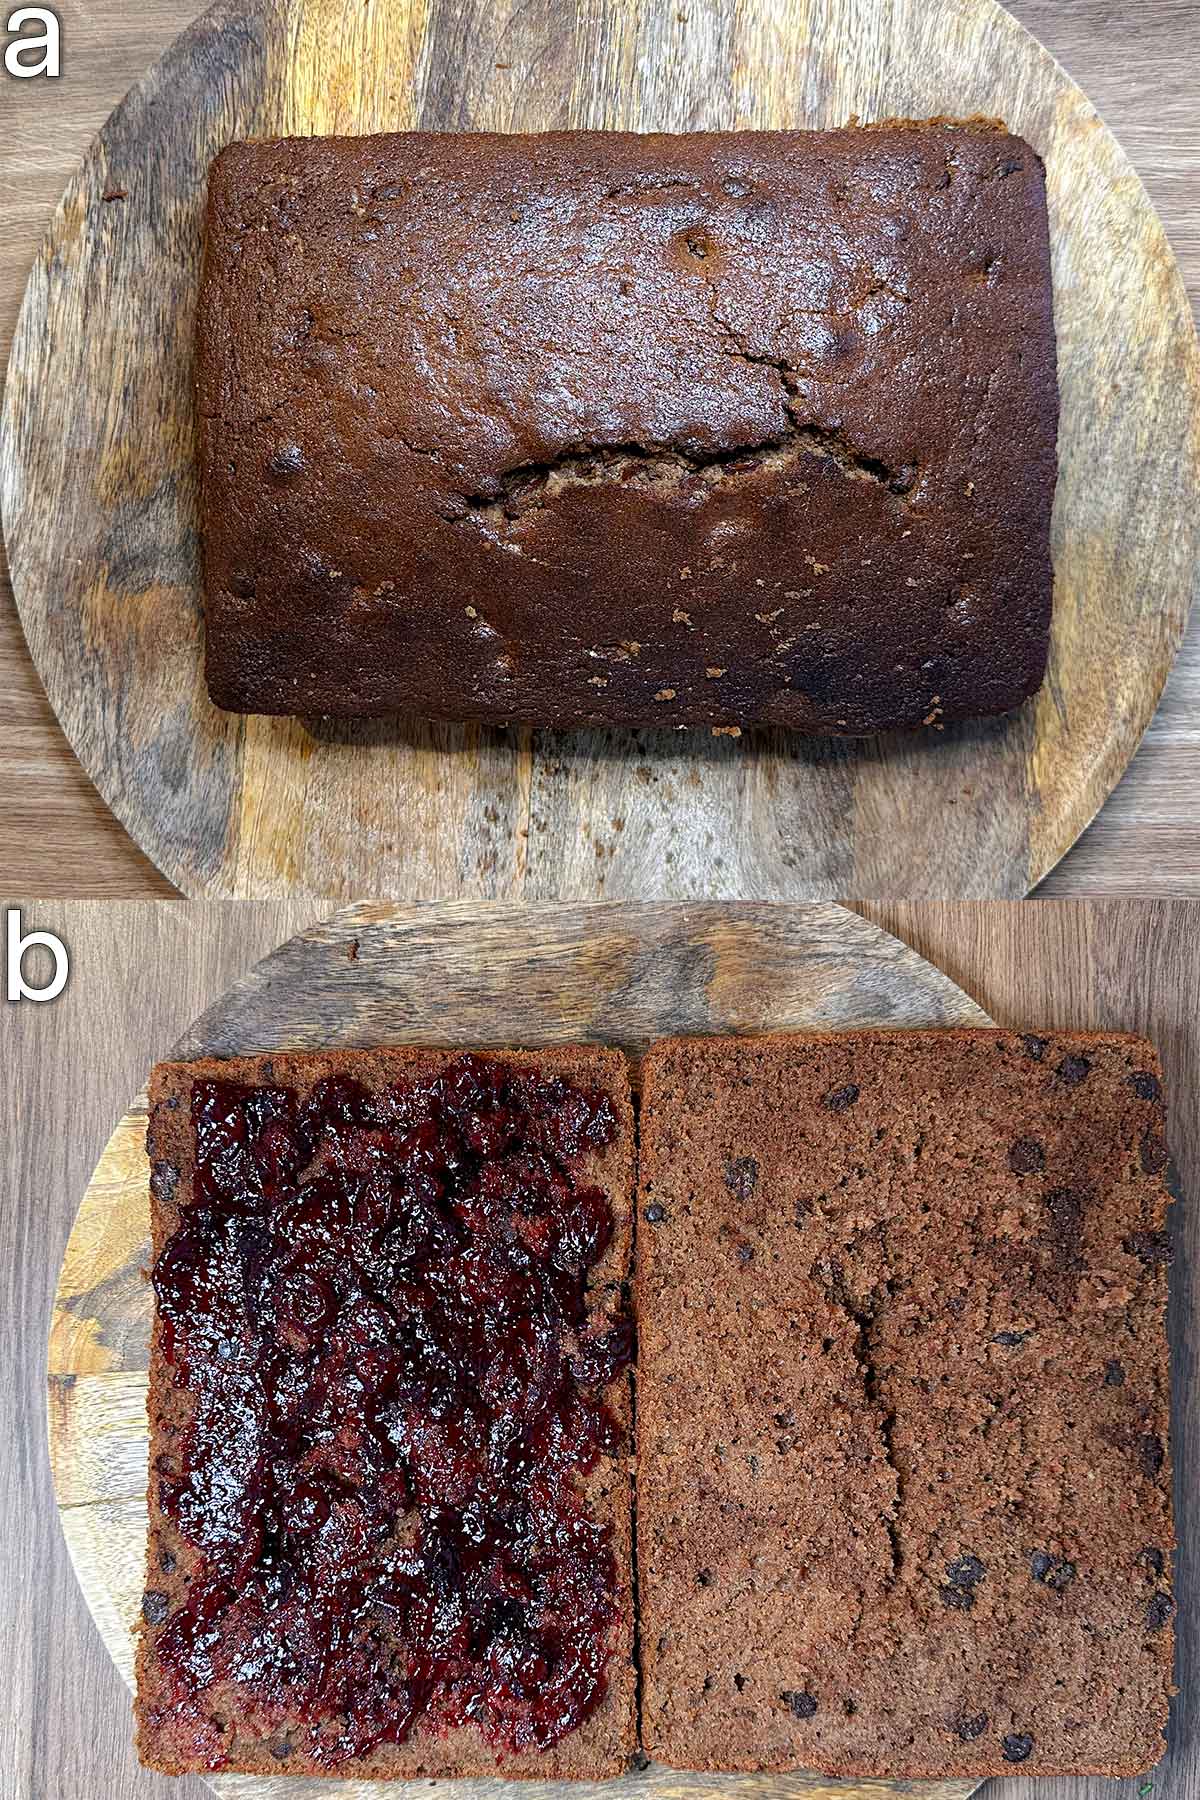 Two shot collage of the cooked cake slices through the middle then one half covered in jam.